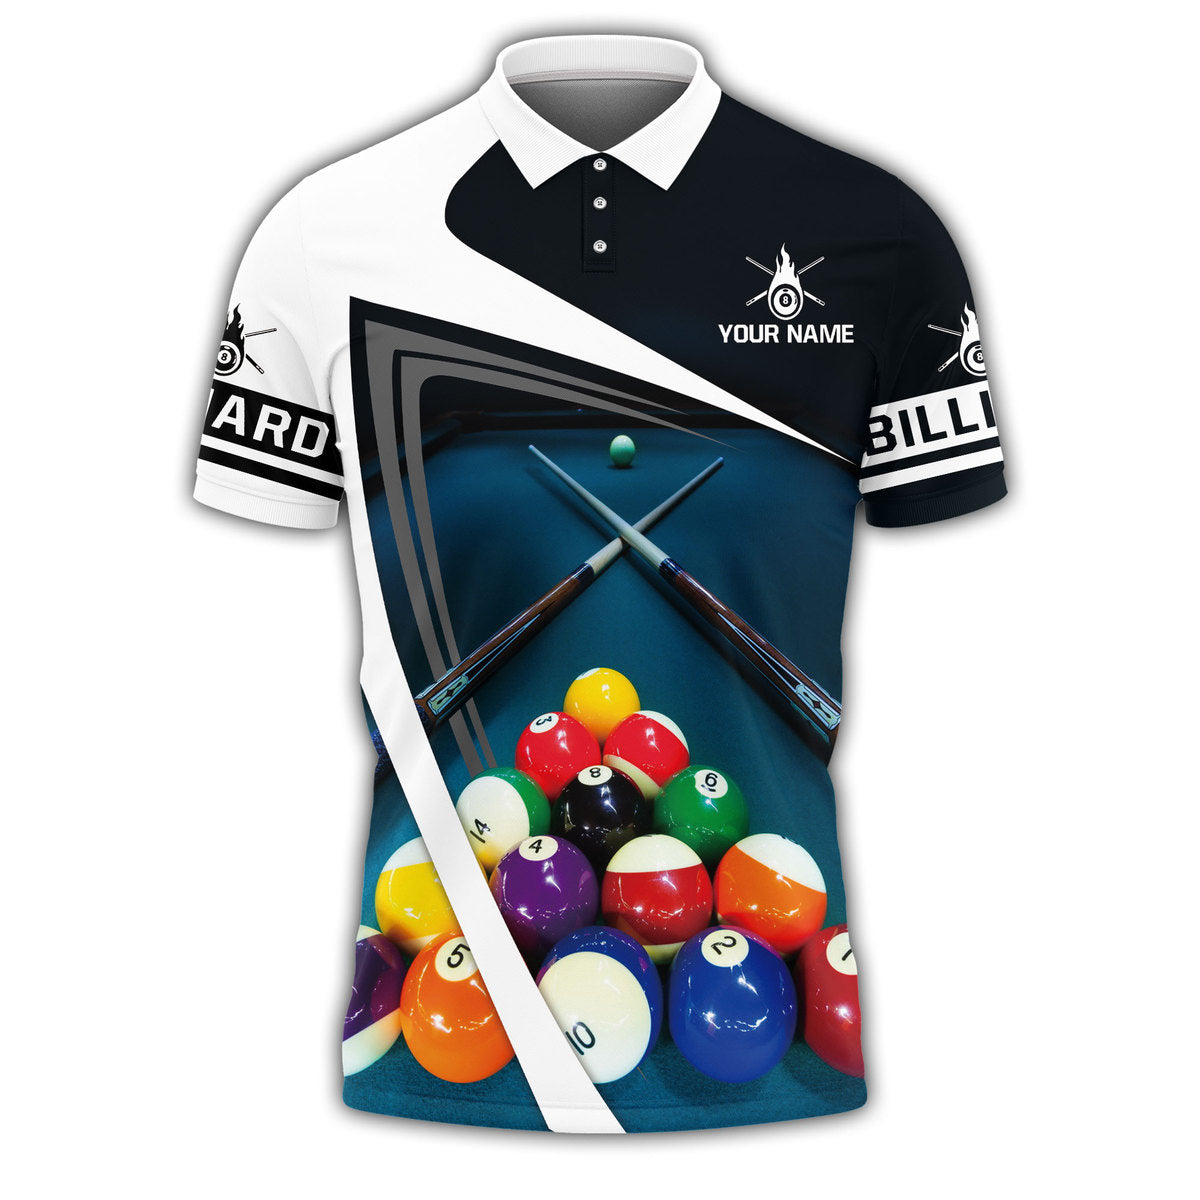 Personalized Name Billiard Polo Shirt Men Women/ Billiard 3D Shirt/ Billiard Team Uniform/ Billiard Lover Gift